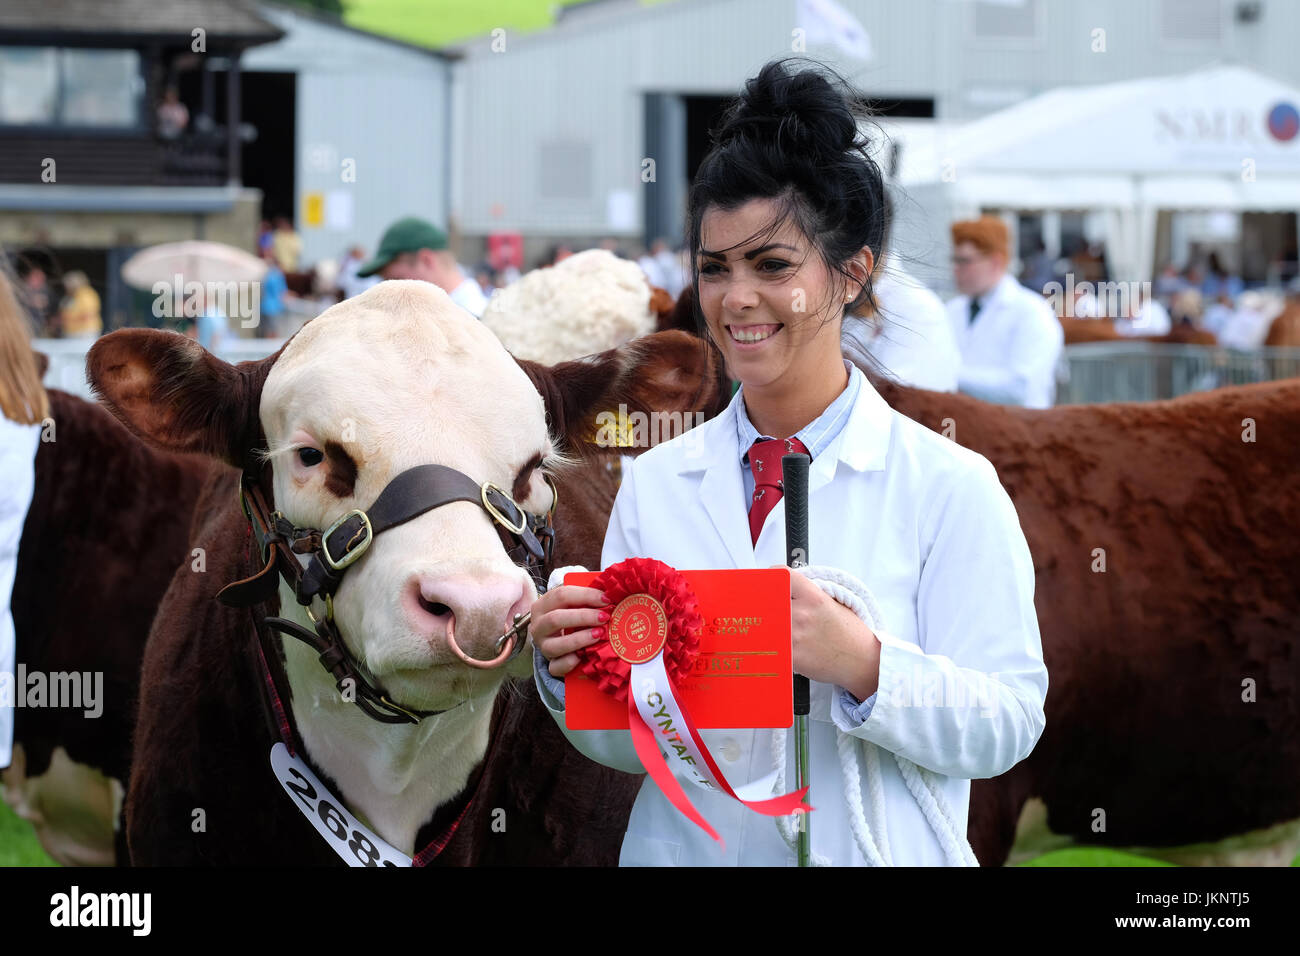 Builth Wells, Wales, UK. 24th July, 2017. Royal Welsh Show: Opening Day of the largest four day agricultural show in Wales. Judging has already begun in the cattle arena - shown here First Class winner in the Hereford Young Bull class. Photo Steven May / Alamy Live News Stock Photo